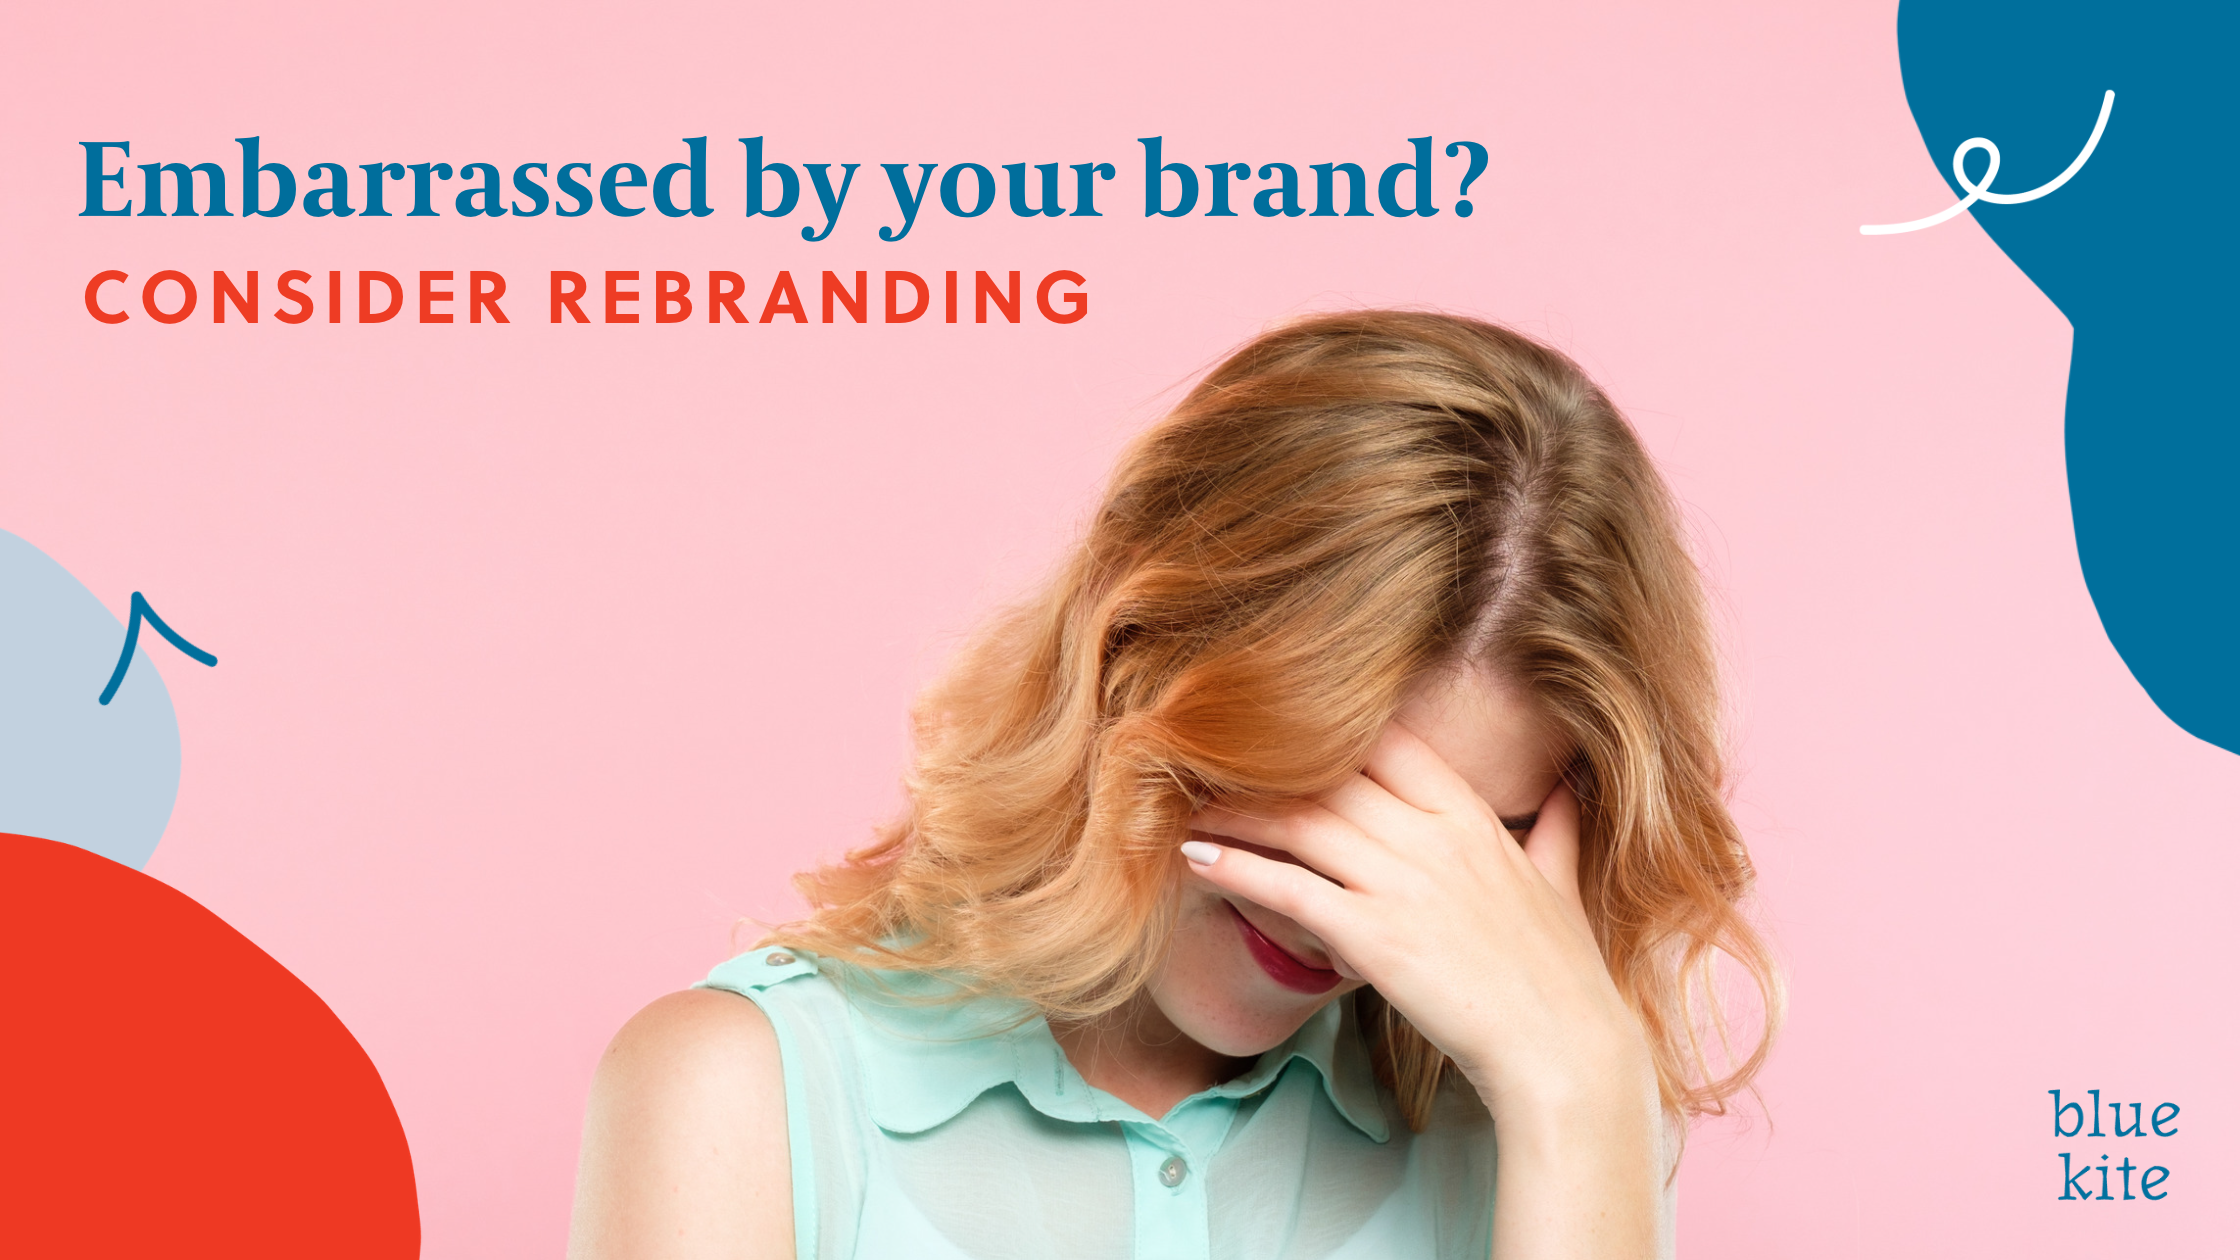 Embarrassed by your brand? It might be time to change it